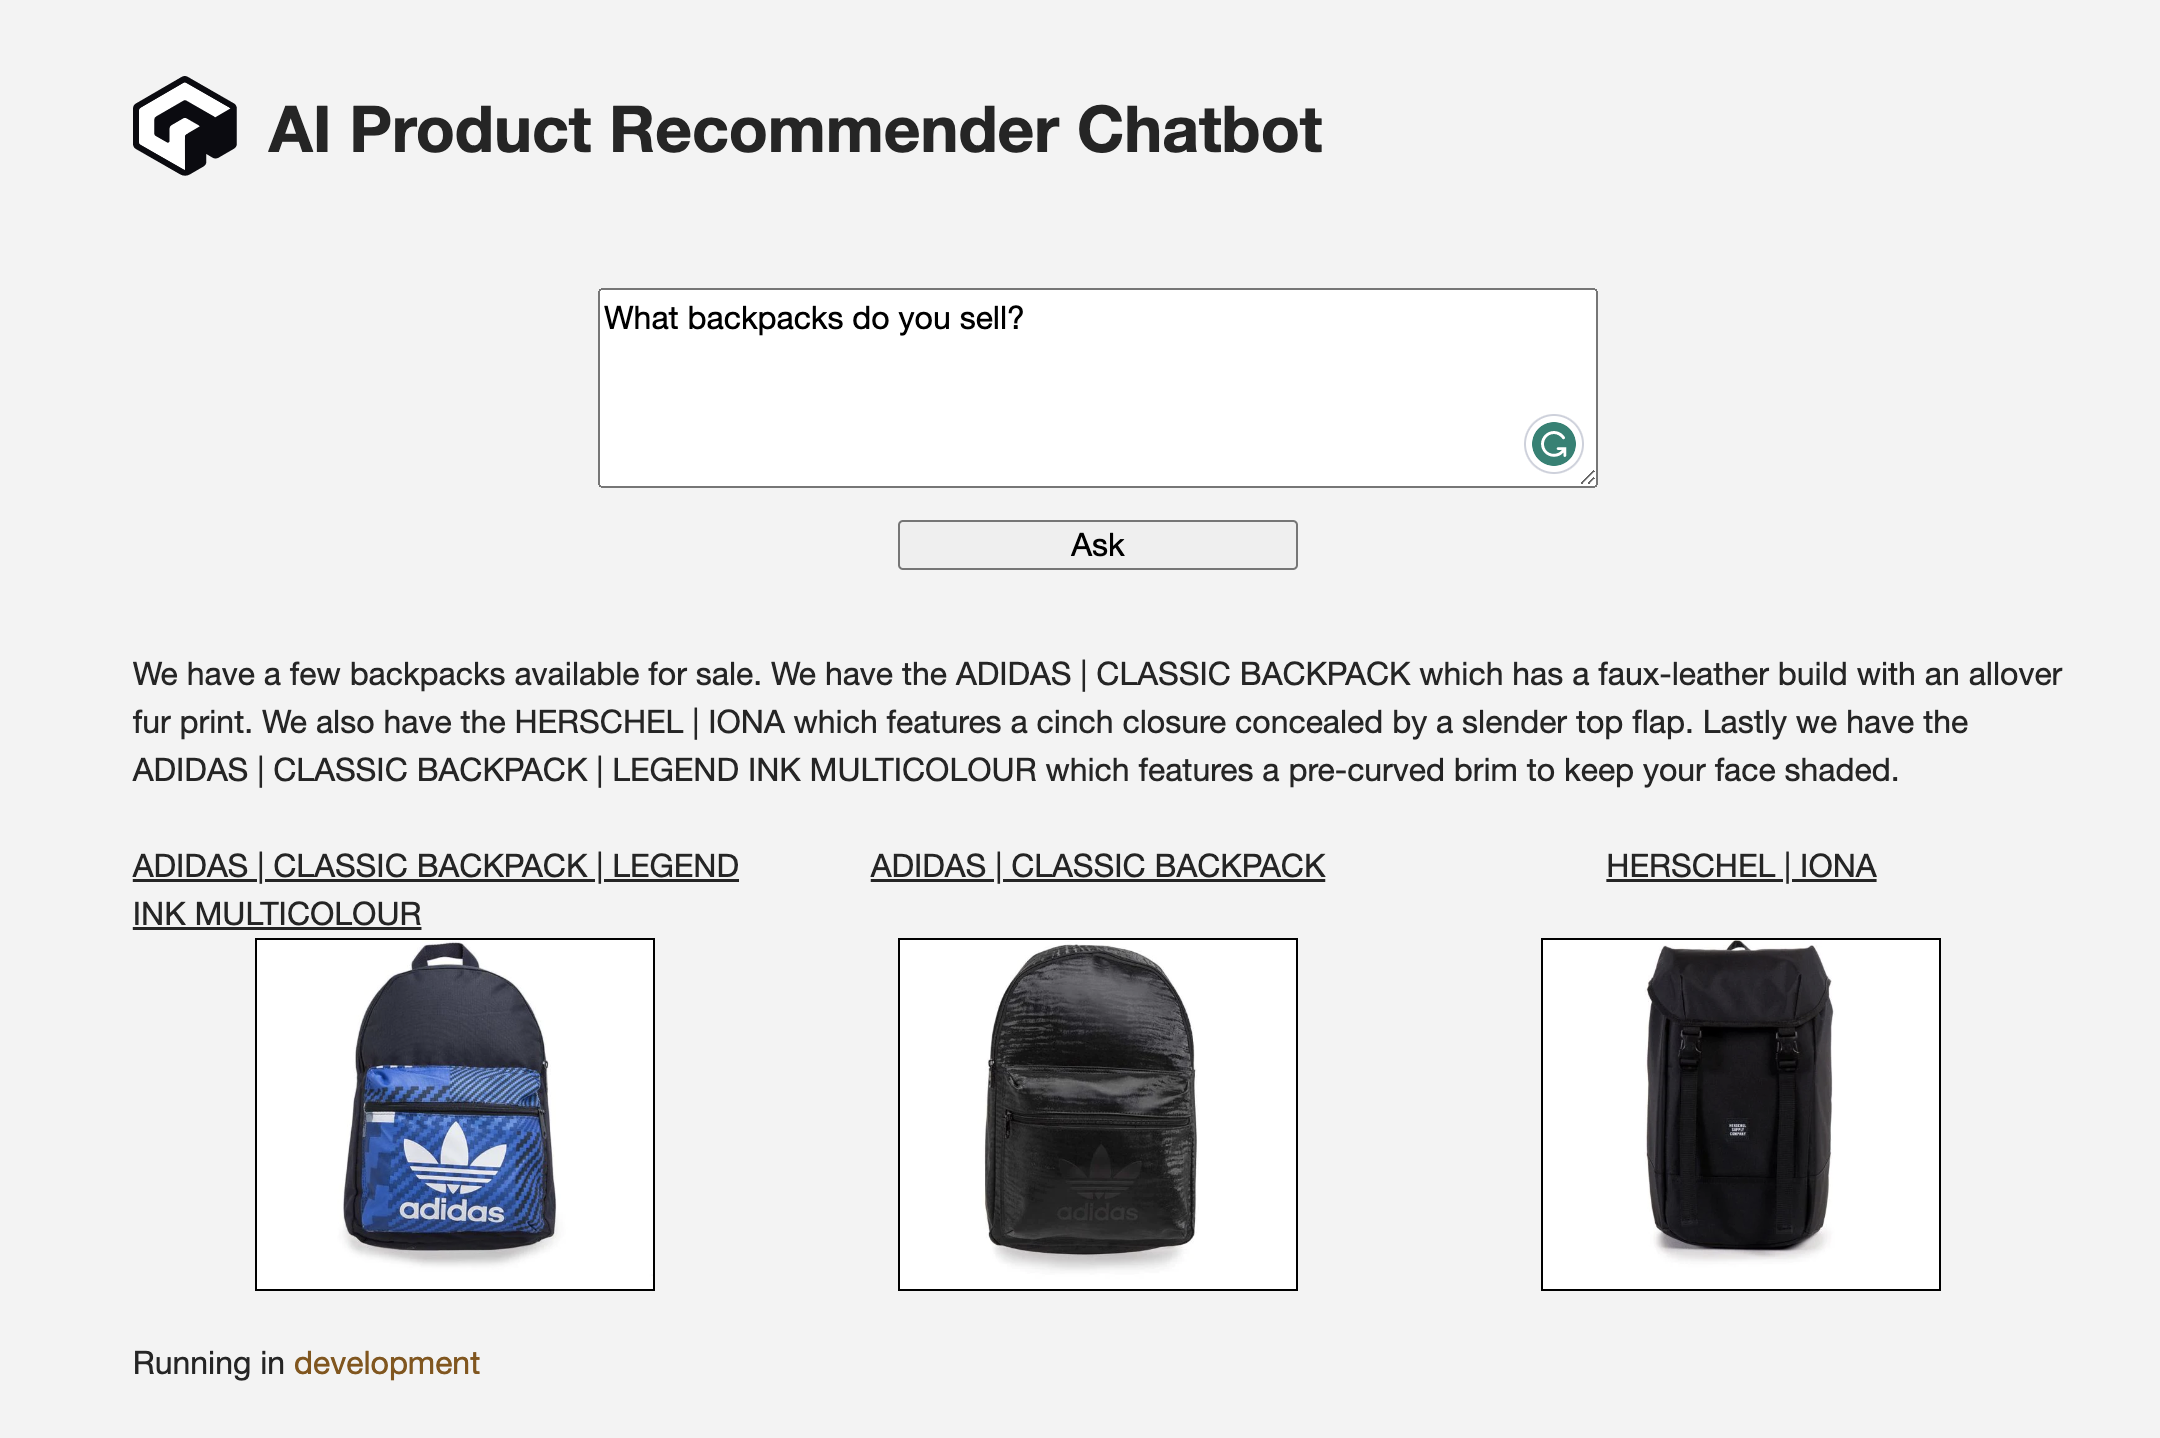 Screenshot of the finished chatbot, with a question entered (asking about backpacks for sale) and a response. The response includes a text response and product recommendations, both generated by langchain